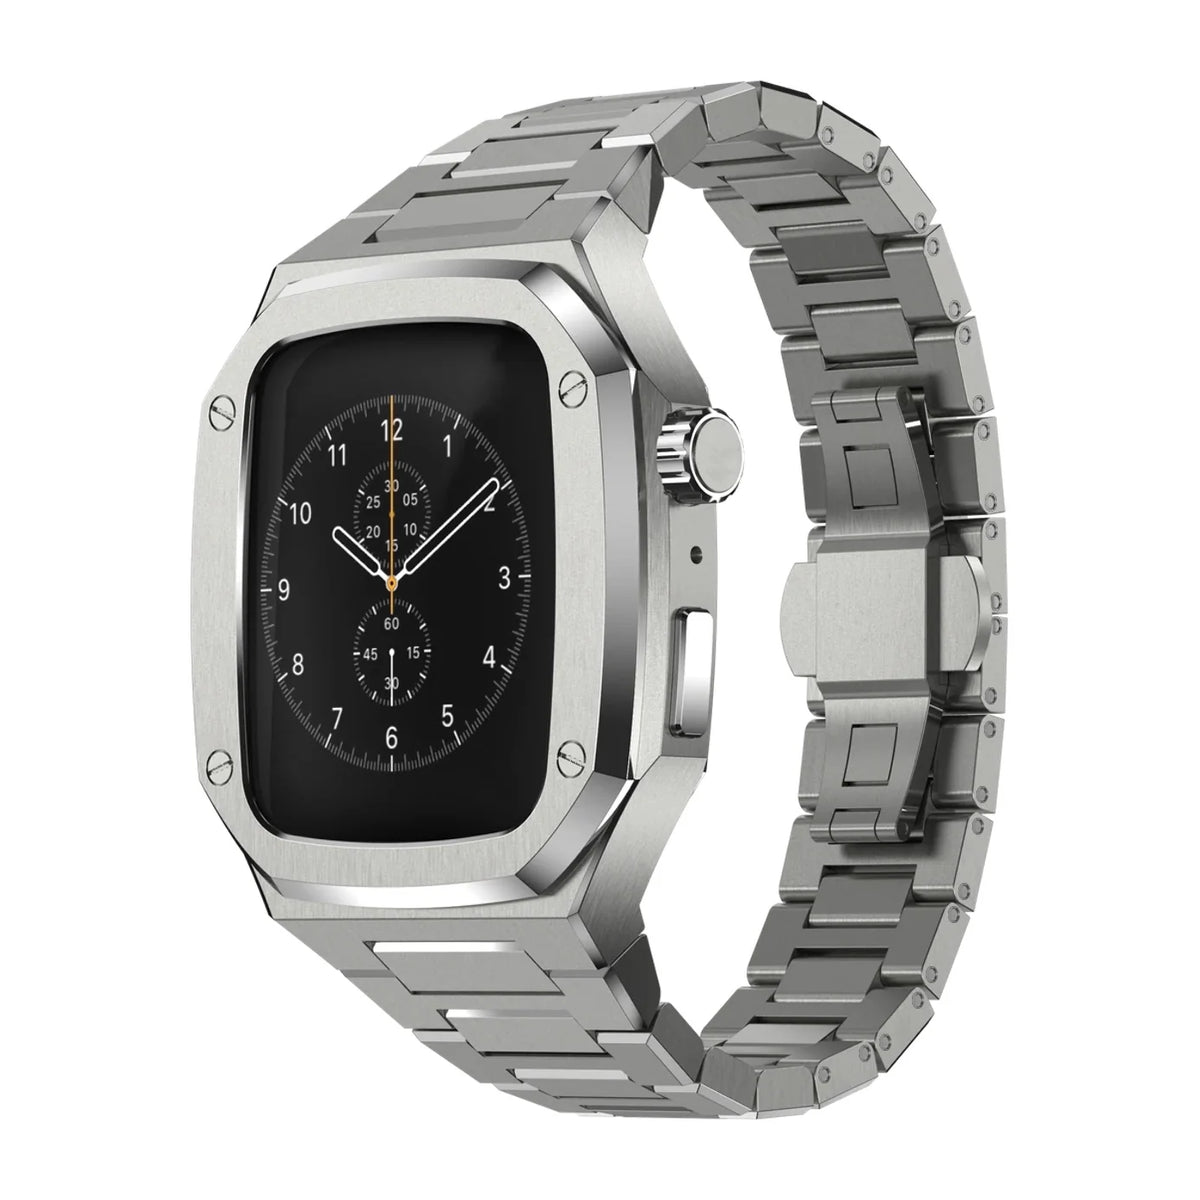 Luxury Apple Watch Case Stainless Steel Band